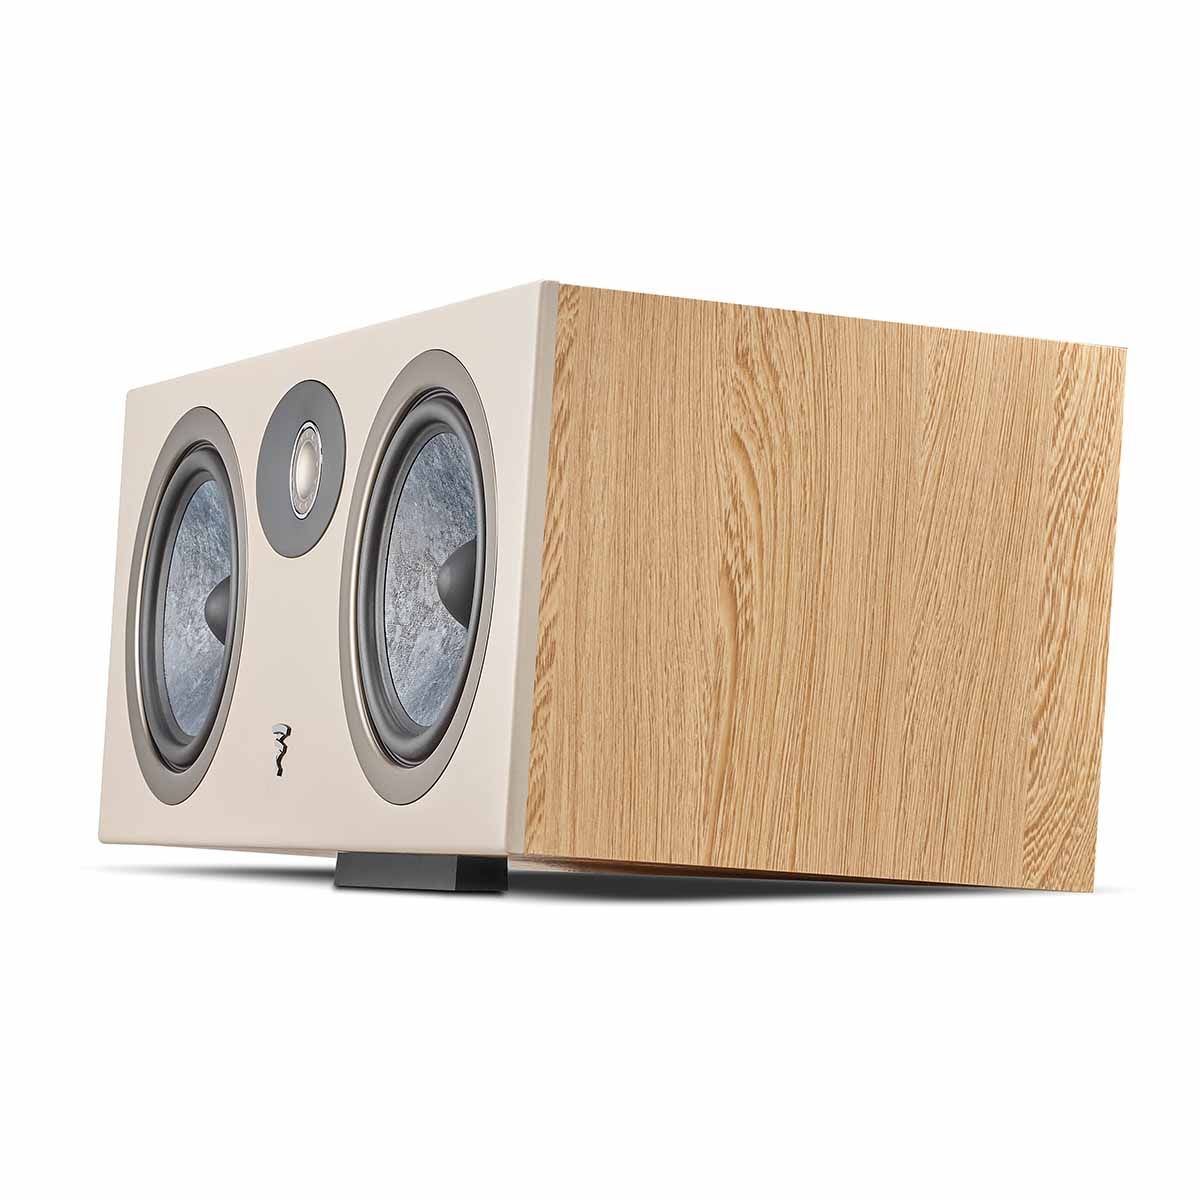 Focal Theva Center Channel Speaker - Light Wood - Each - side view with spacer installed